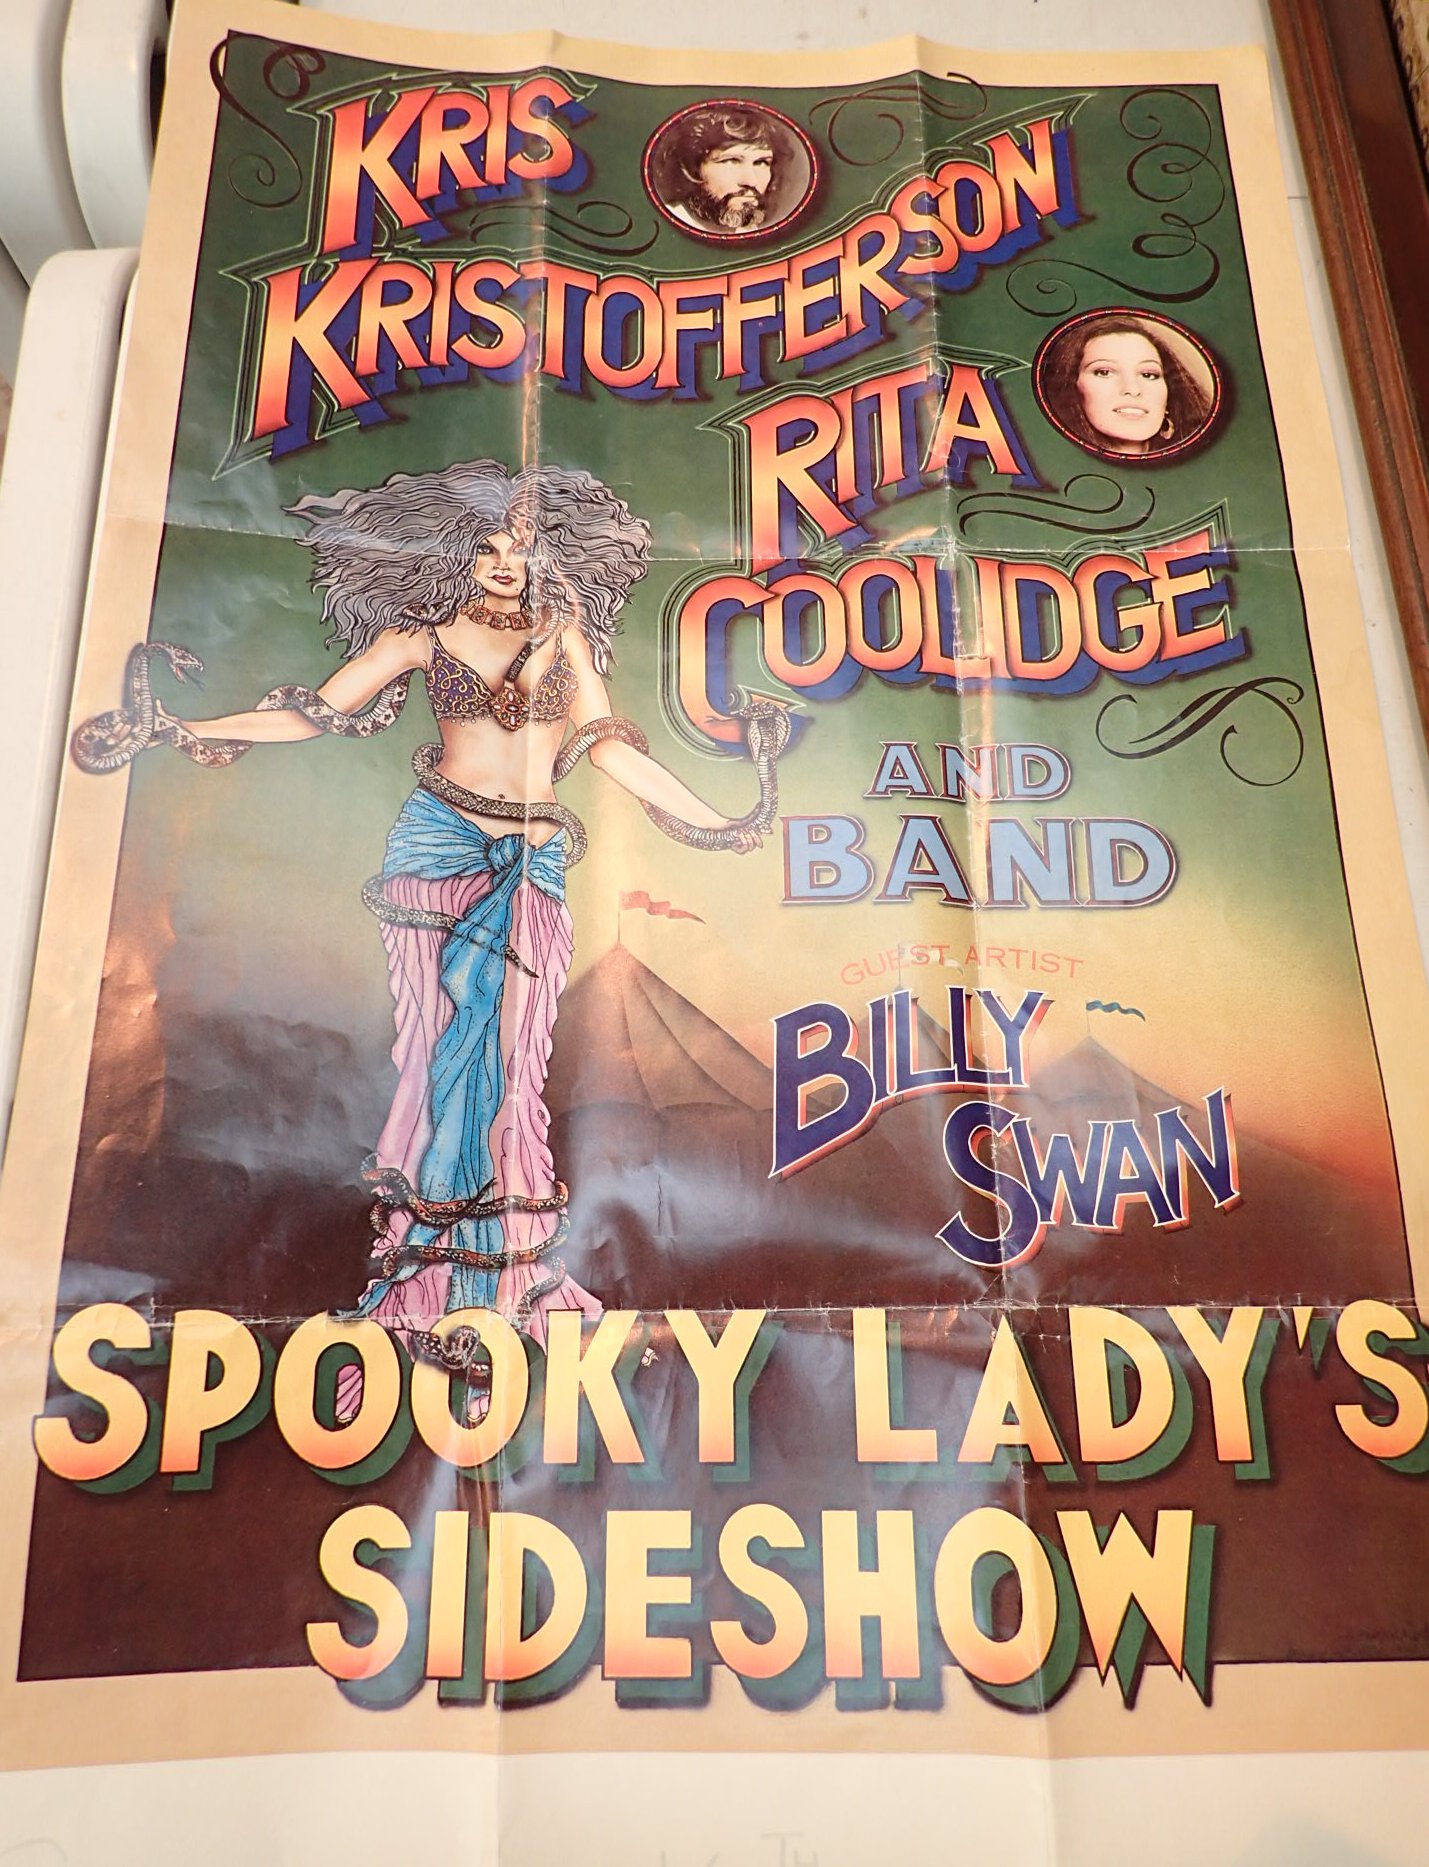 Oriental Chris Kristofferson Rita Coolidge and Billy Swan poster from Apollo Manchester c1970s